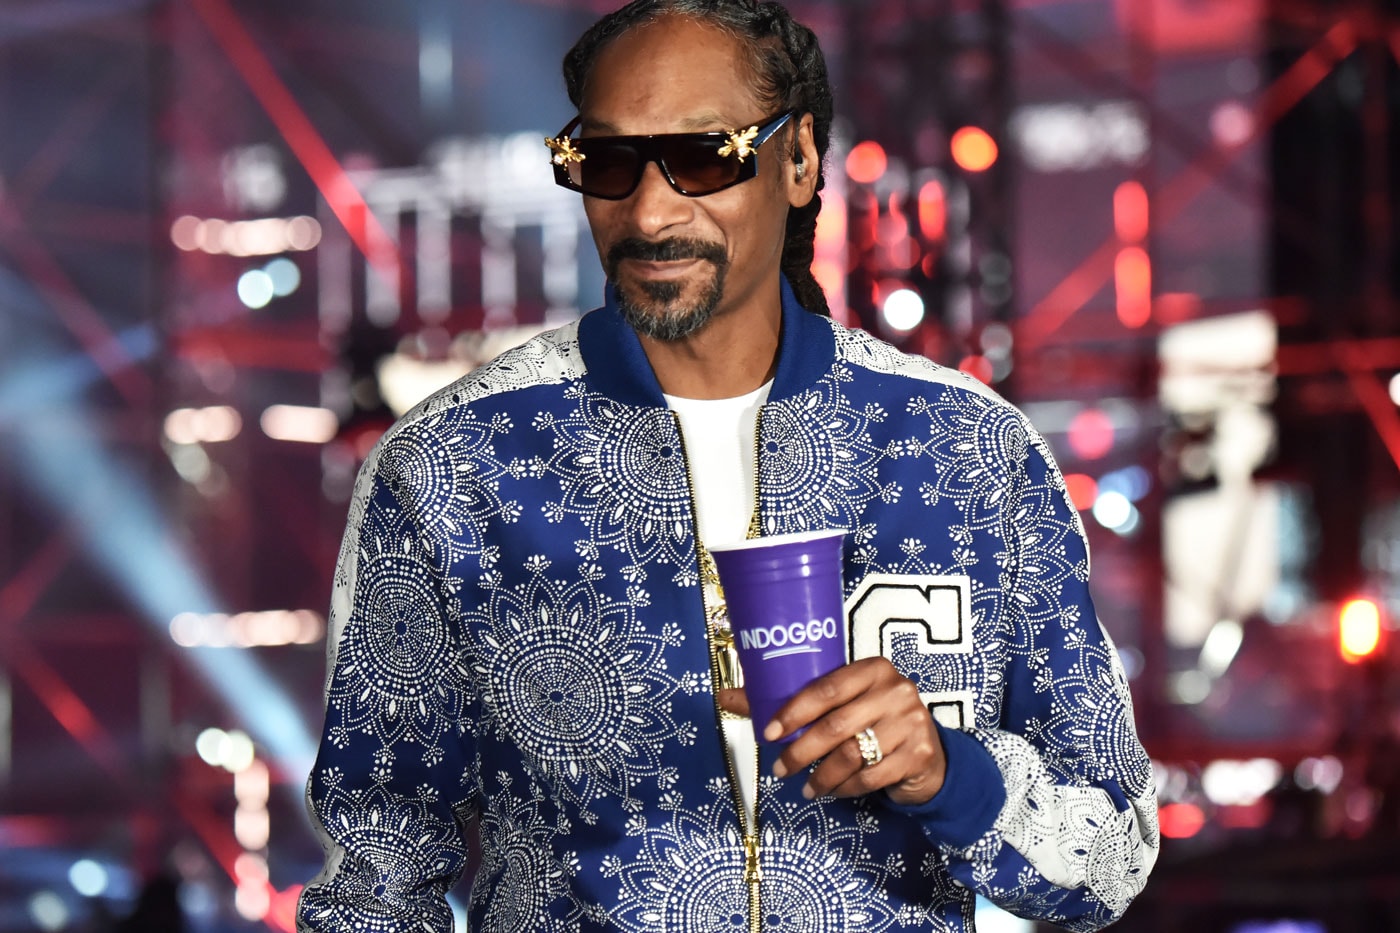 Snoop Dogg Teased He Might Take Ownership of His Former Label Death Row Records rapper hip hop weed legendary doggystyle dr dre 2pac the doggfather roddy ricch ty dolla $ign yg